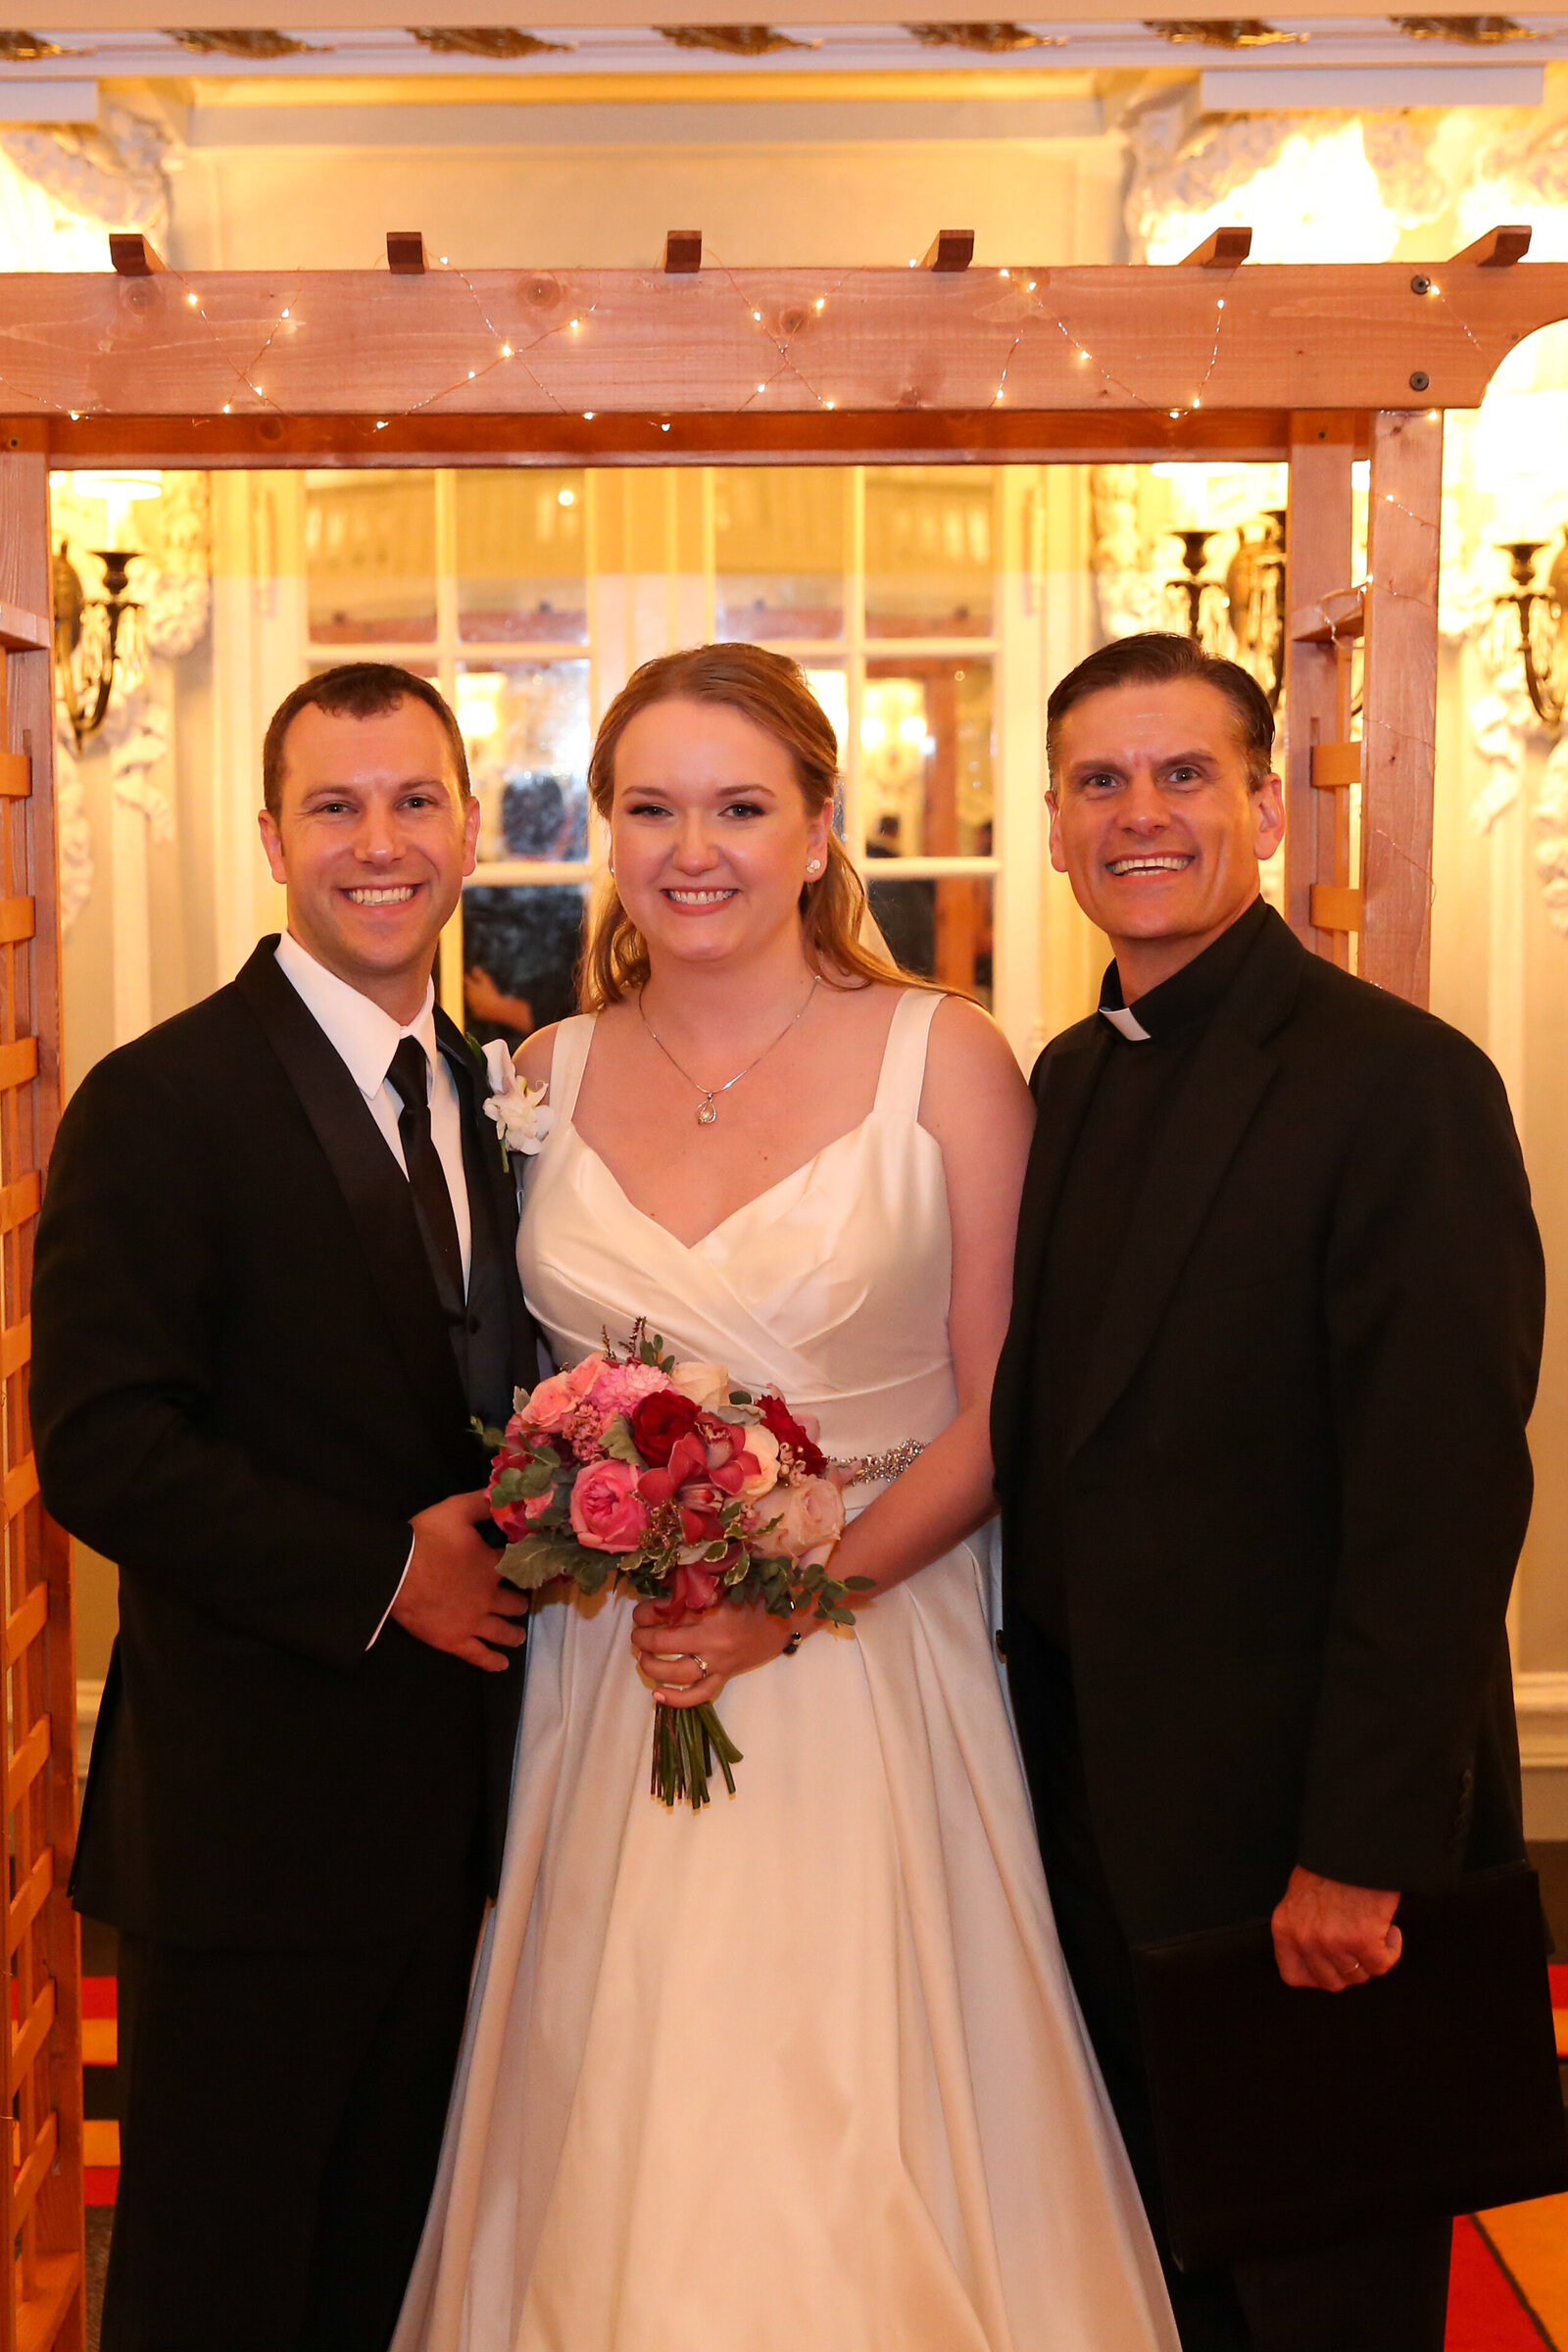 Happy bride and groom pose with their wedding officiant for portrait